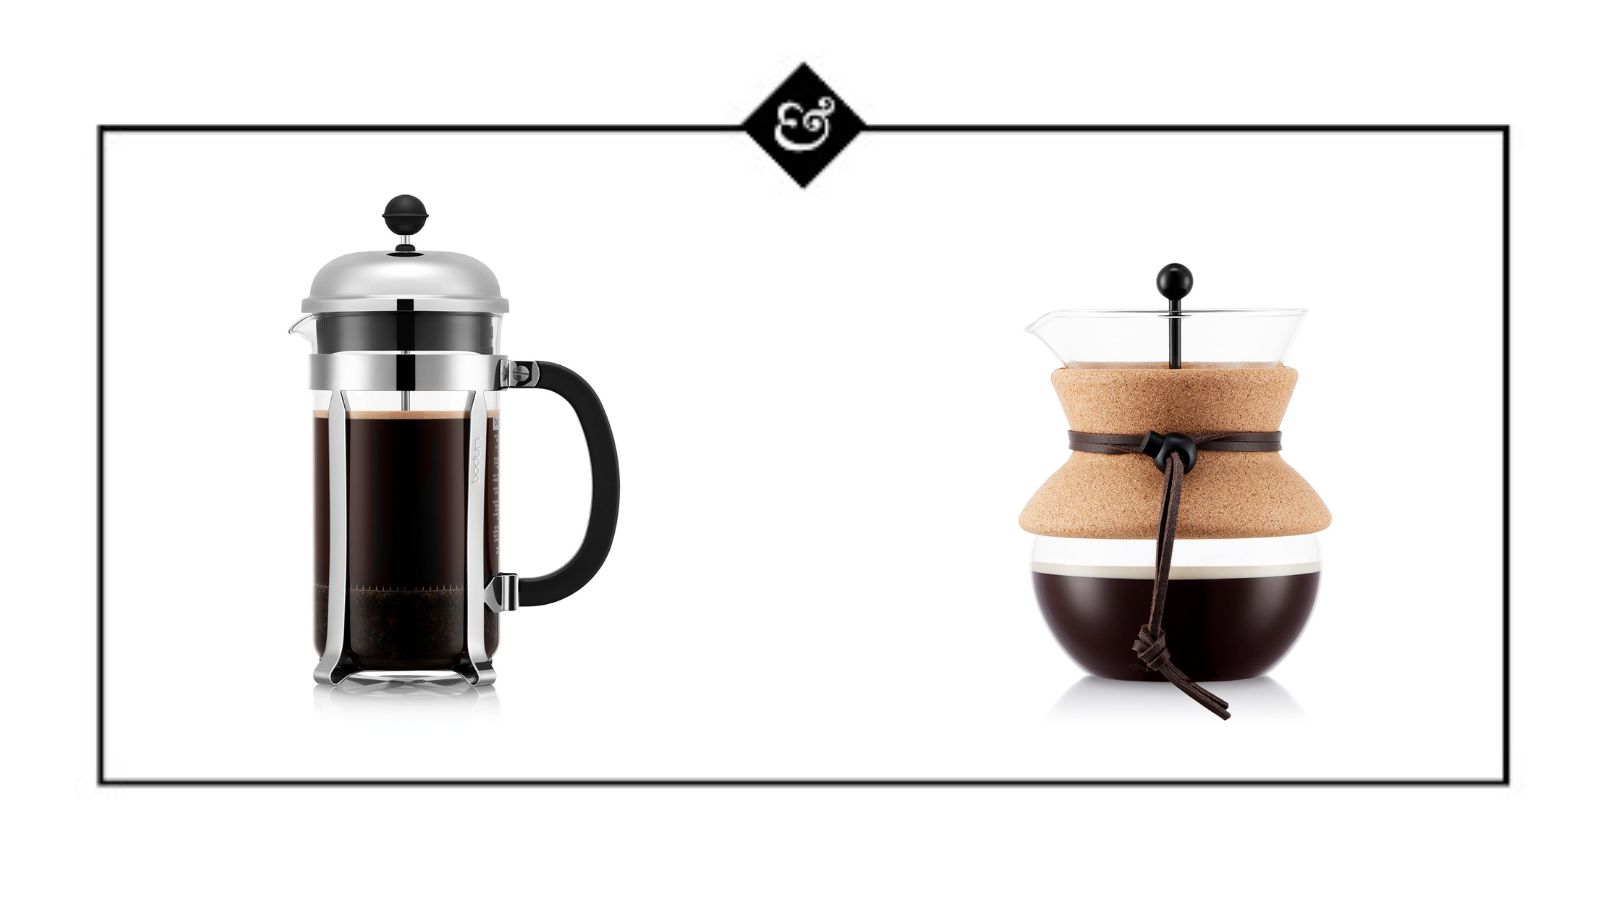 I'm a trained barista here’s why the French press is better than pour-over